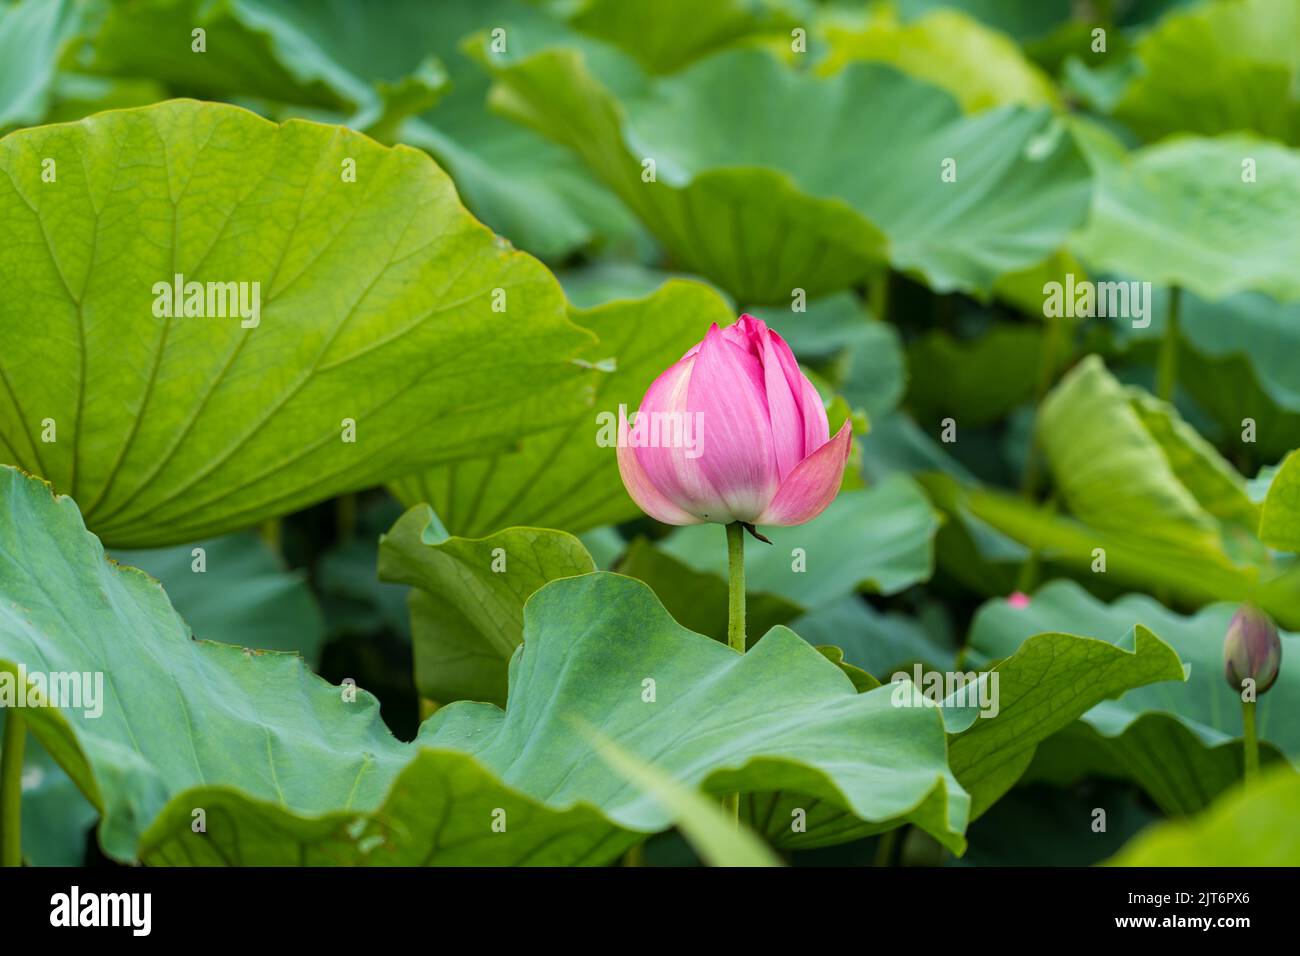 A closeup of a Lotus flower with leaves in a Lake Stock Photo